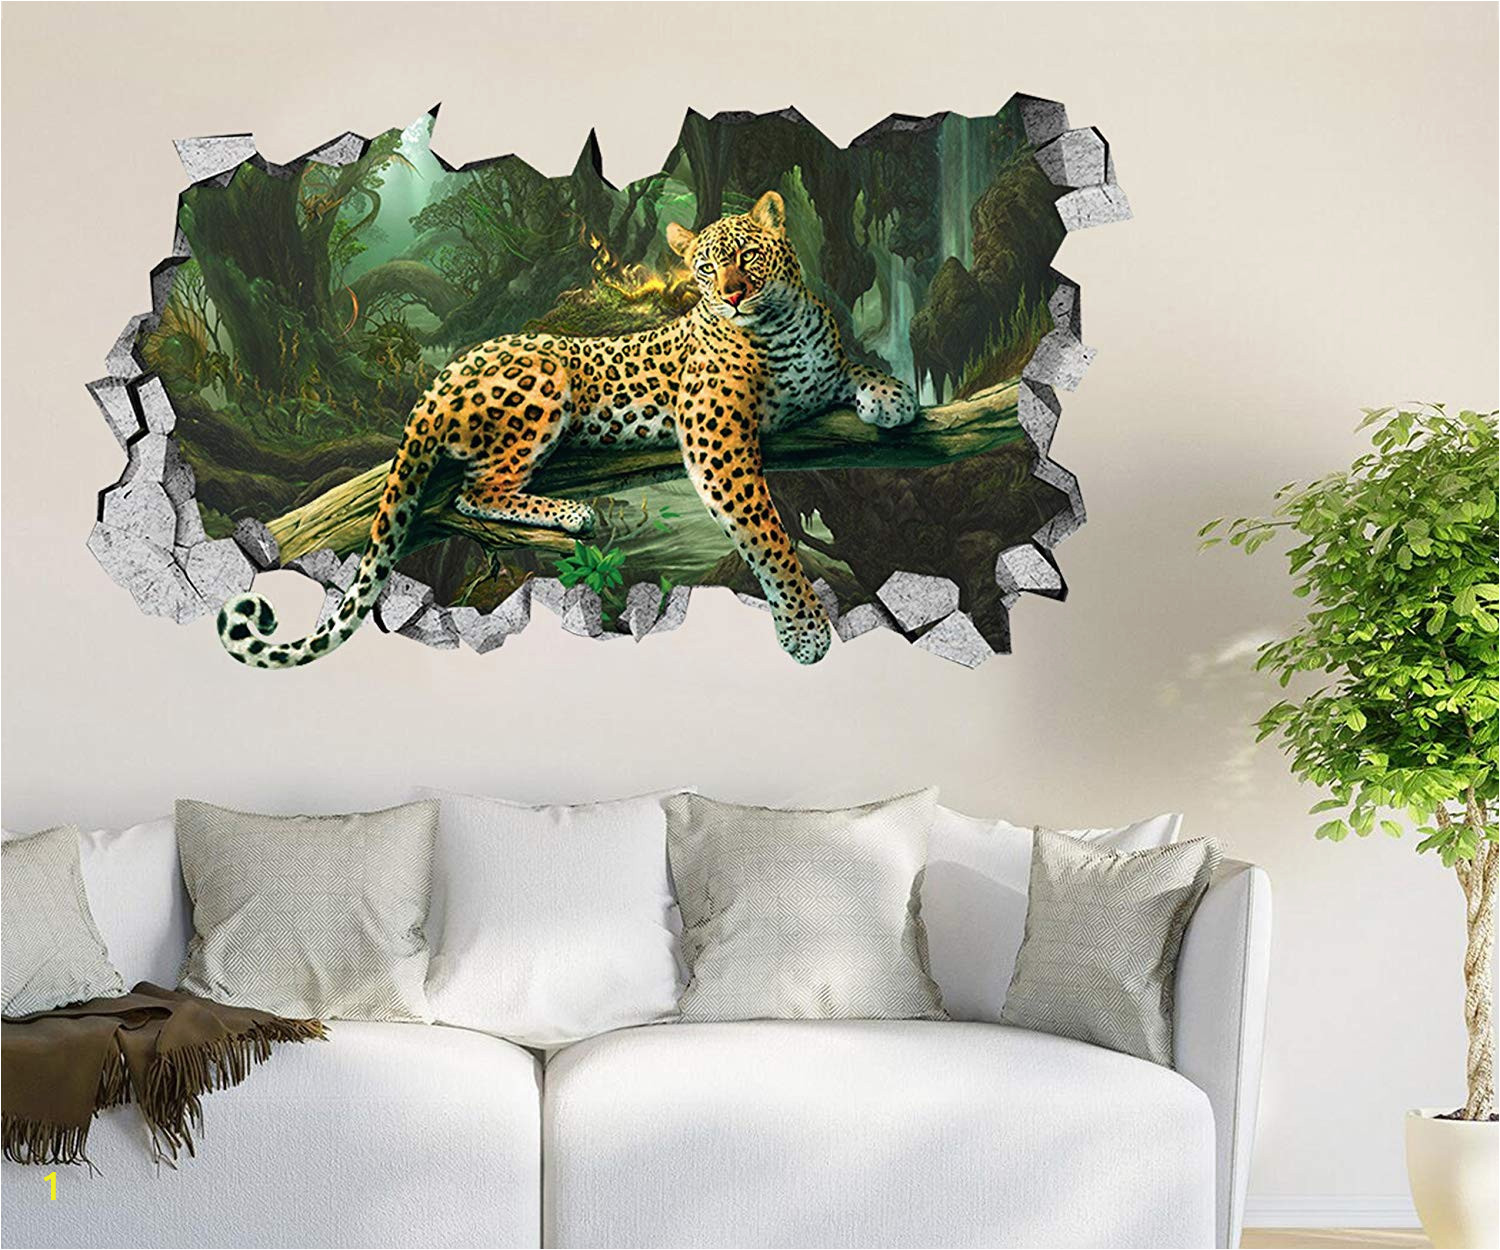 Self Adhesive Wall Murals Stickers 3d forest Leopard Roar 44 Wall Murals Wall Stickers Decal